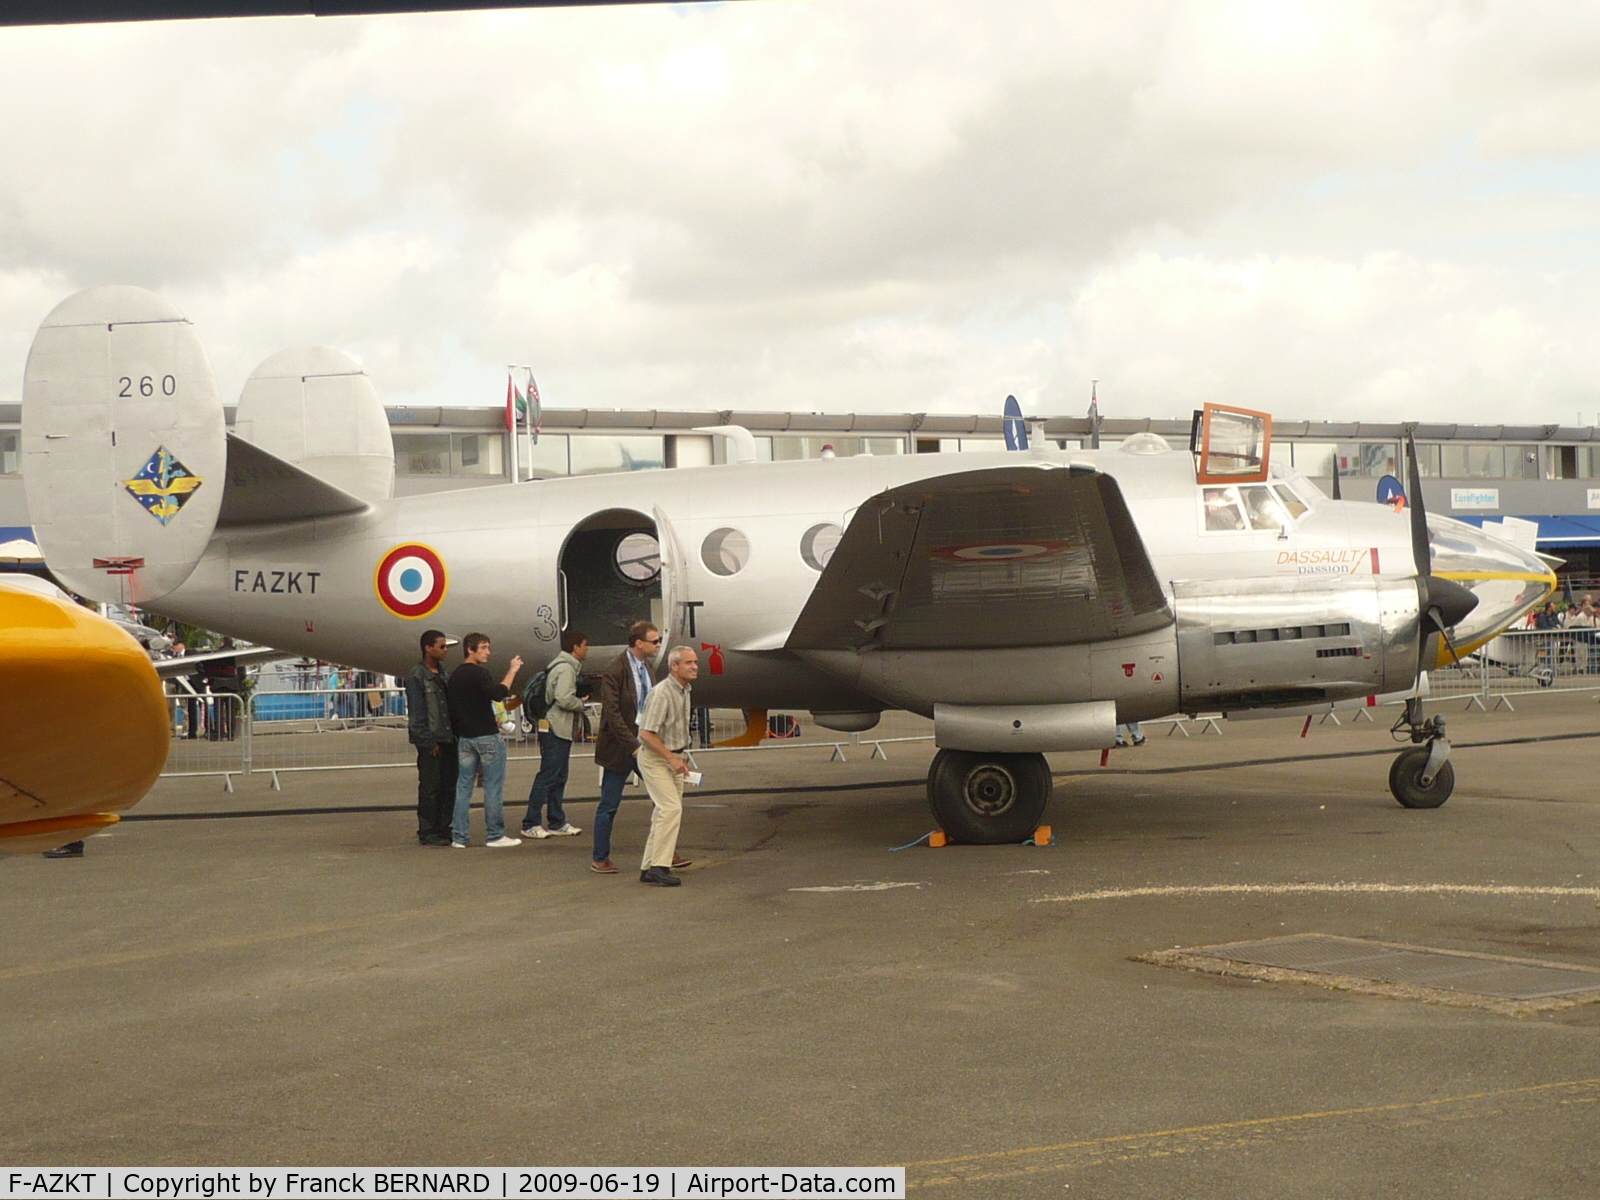 F-AZKT, 1954 Dassault MD-311 Flamant C/N 260, LE BOURGET AIRSHOW